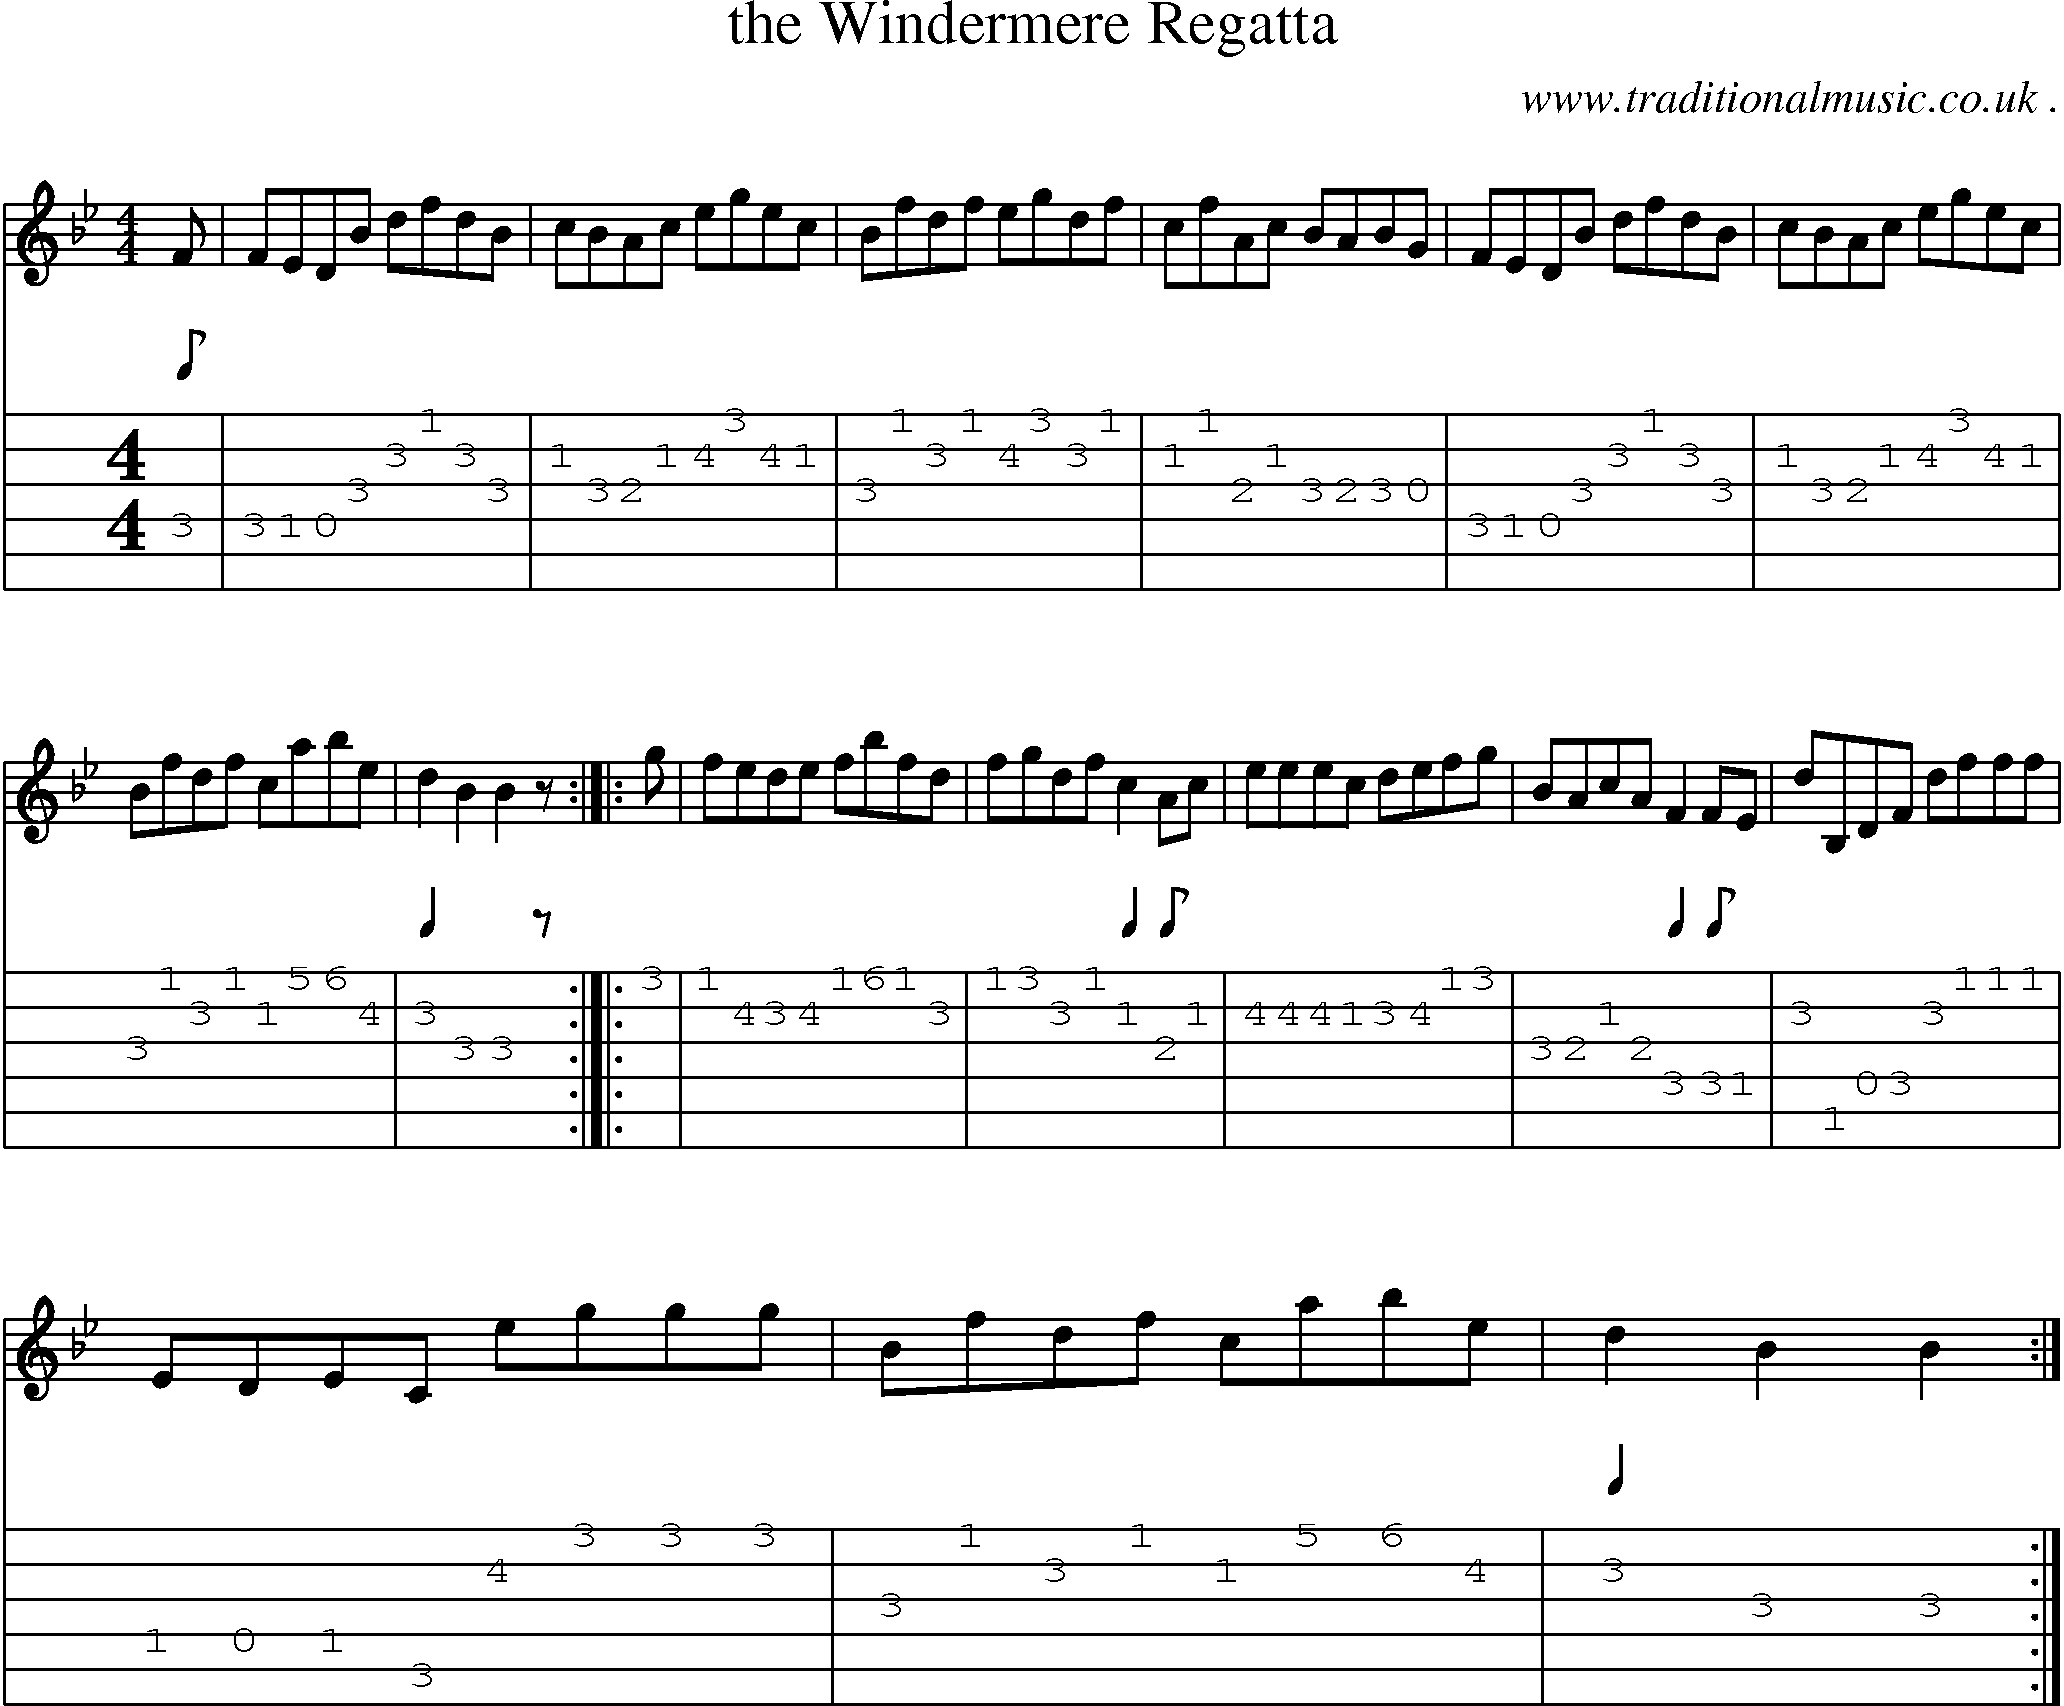 Sheet-Music and Guitar Tabs for The Windermere Regatta